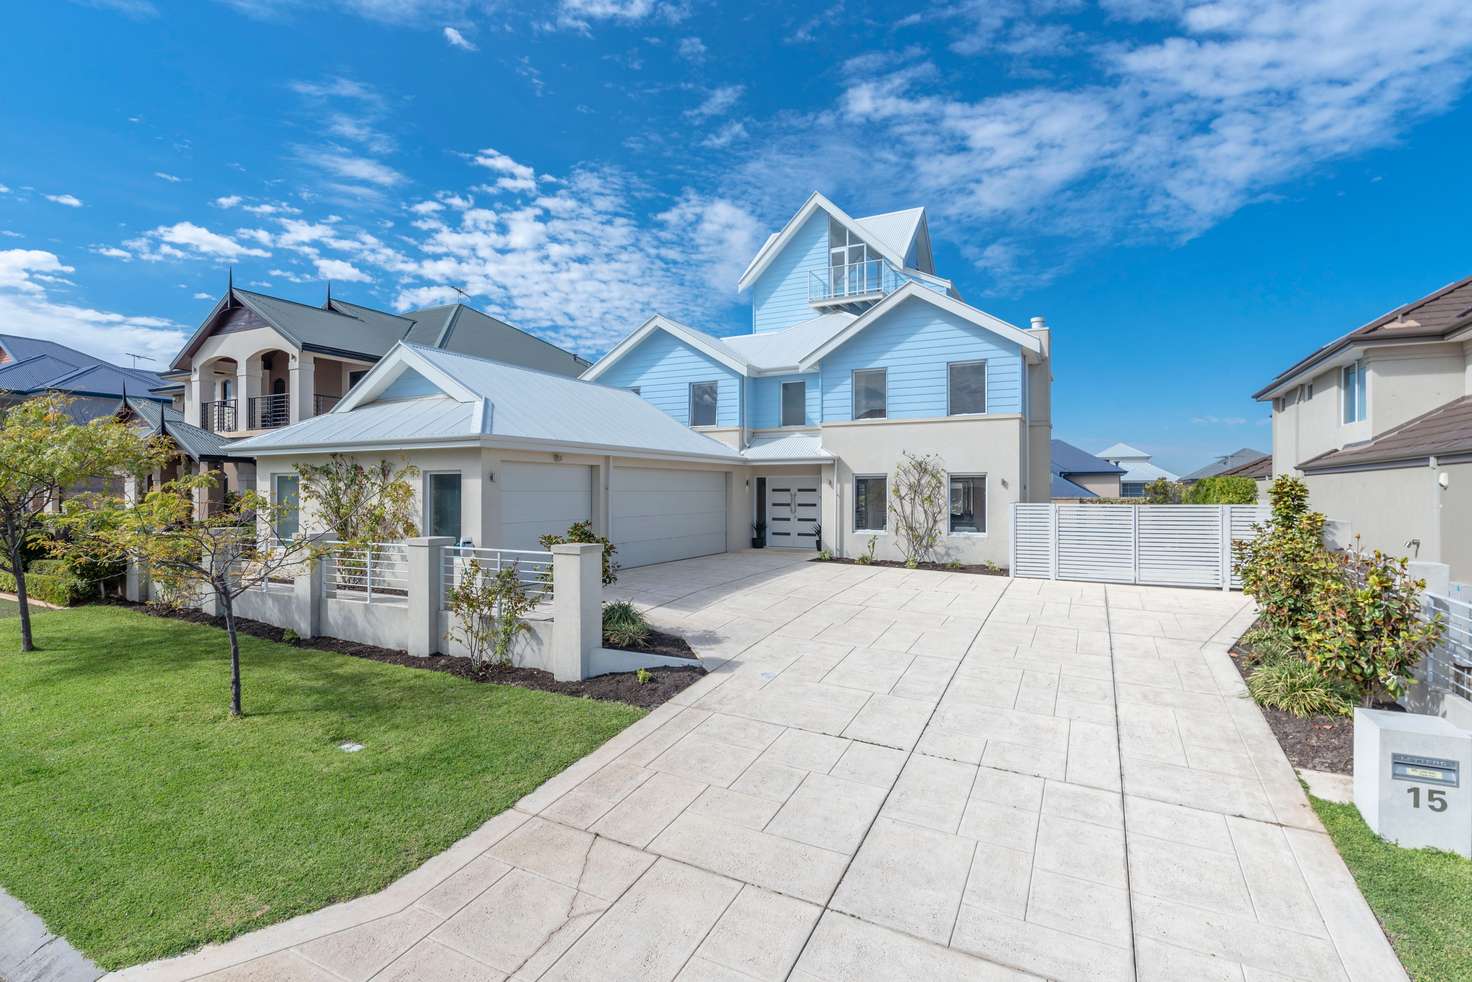 Main view of Homely house listing, 15 Canarias Way, Hillarys WA 6025